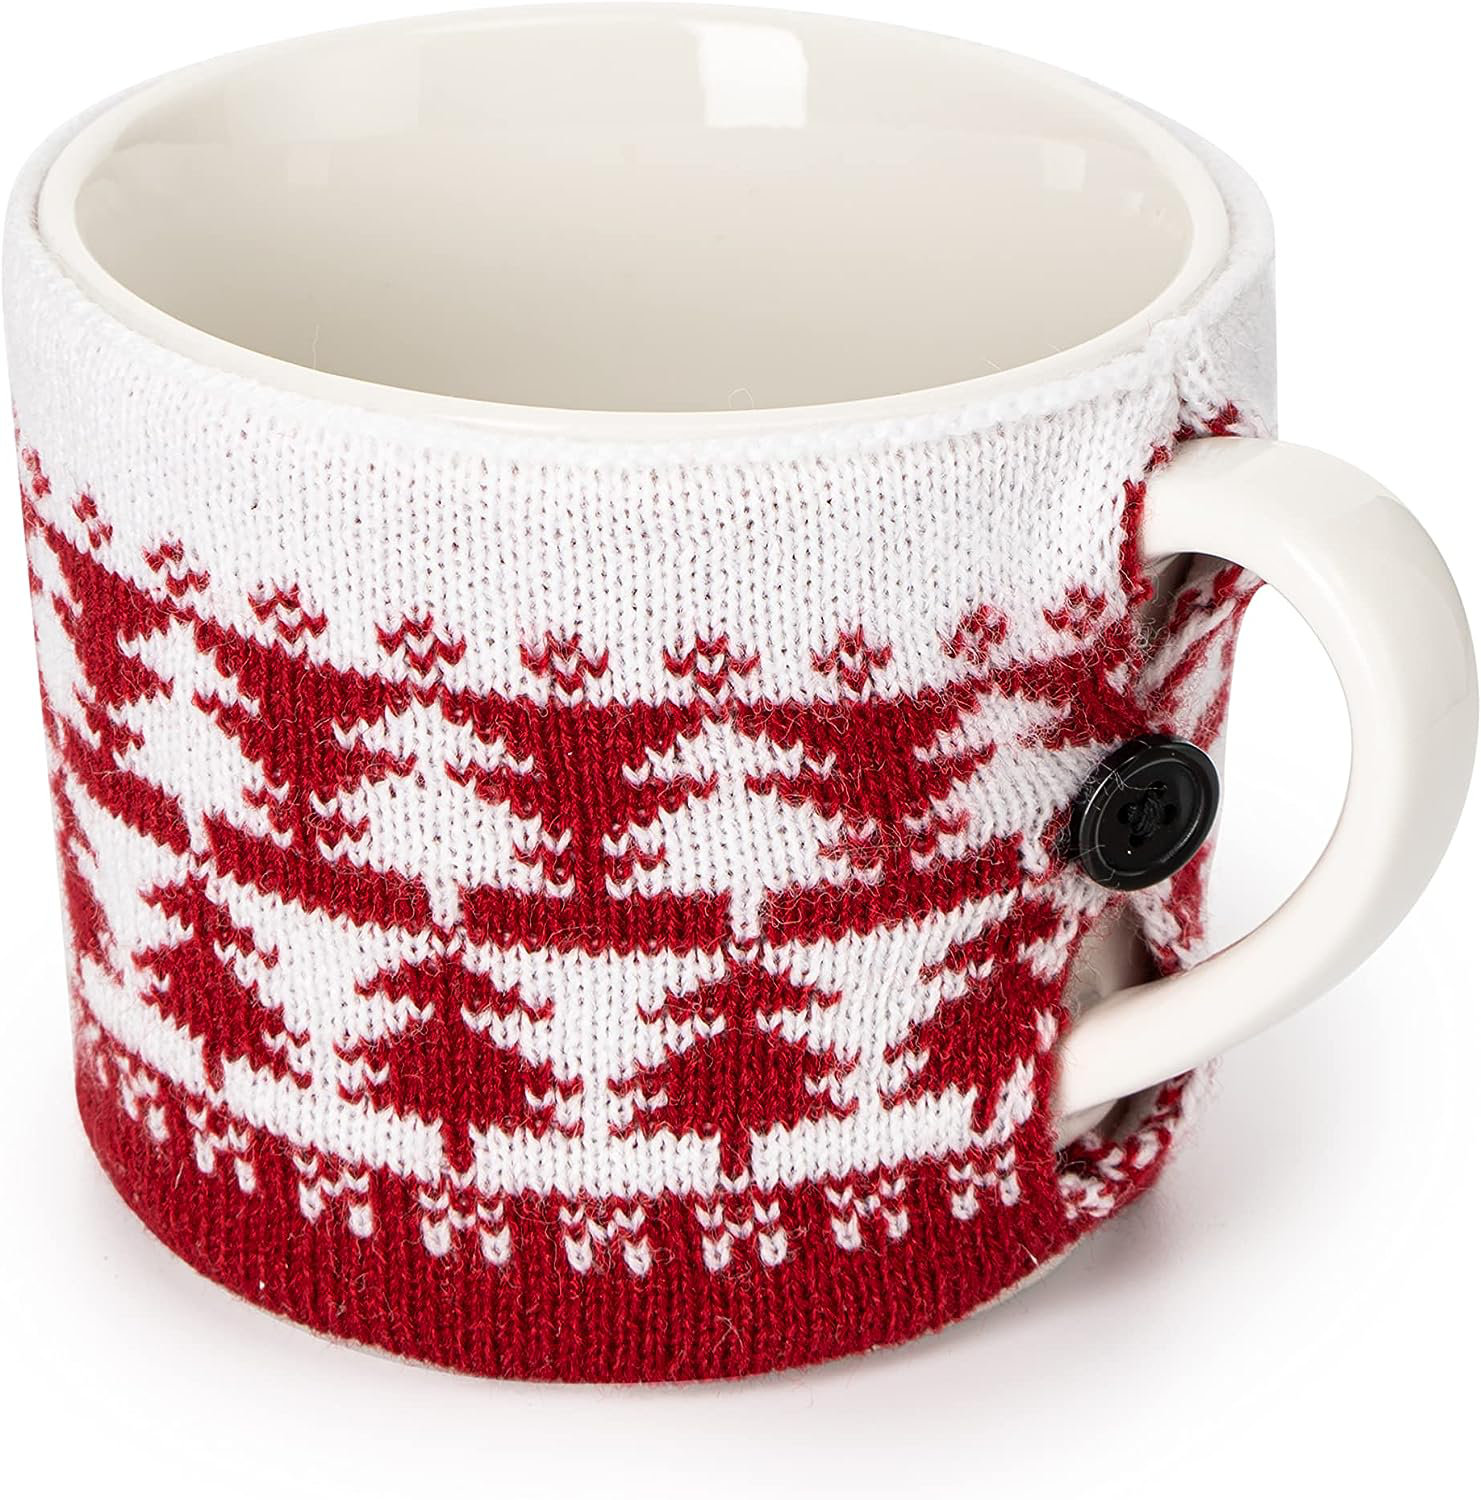 Be Merry Holiday Coffee Gift Set, Includes Ceramic Mug And Holiday